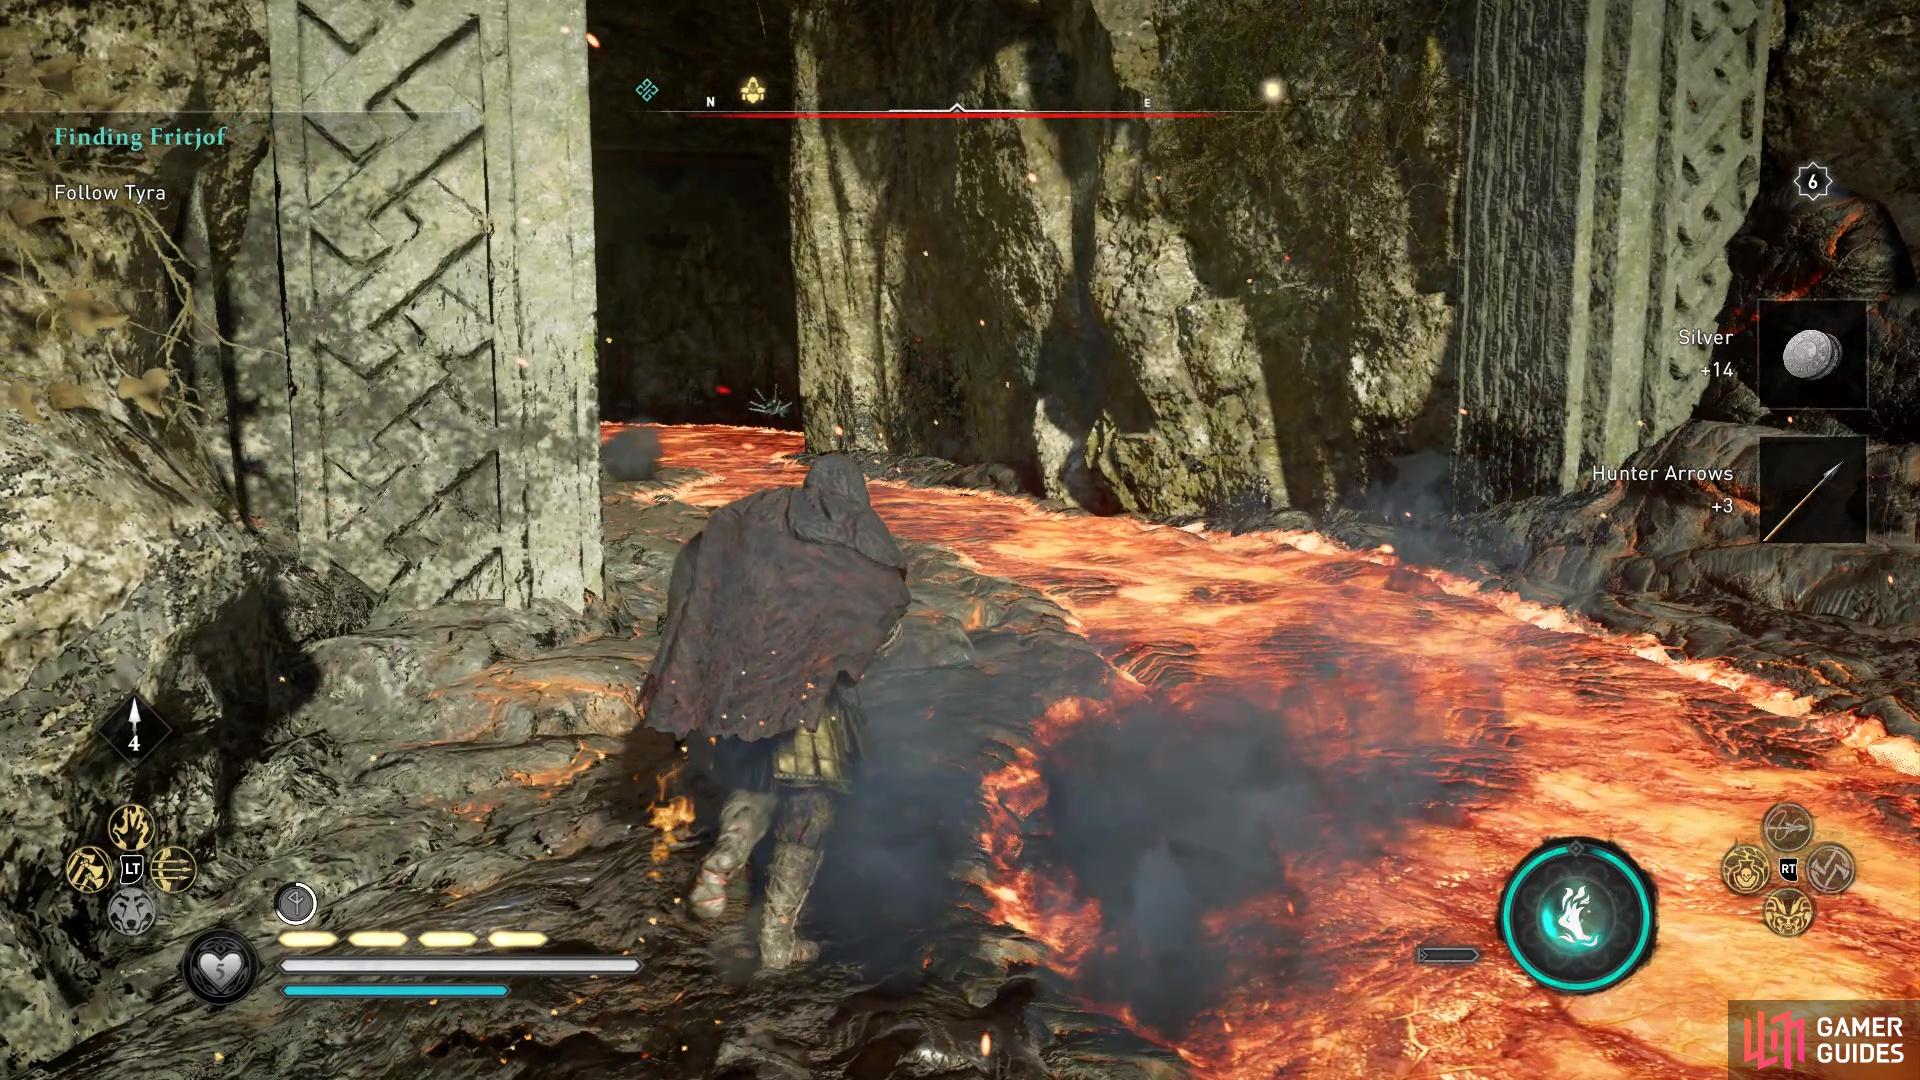 youll need to use the Power of Muspelheim to traverse into the lava cave.